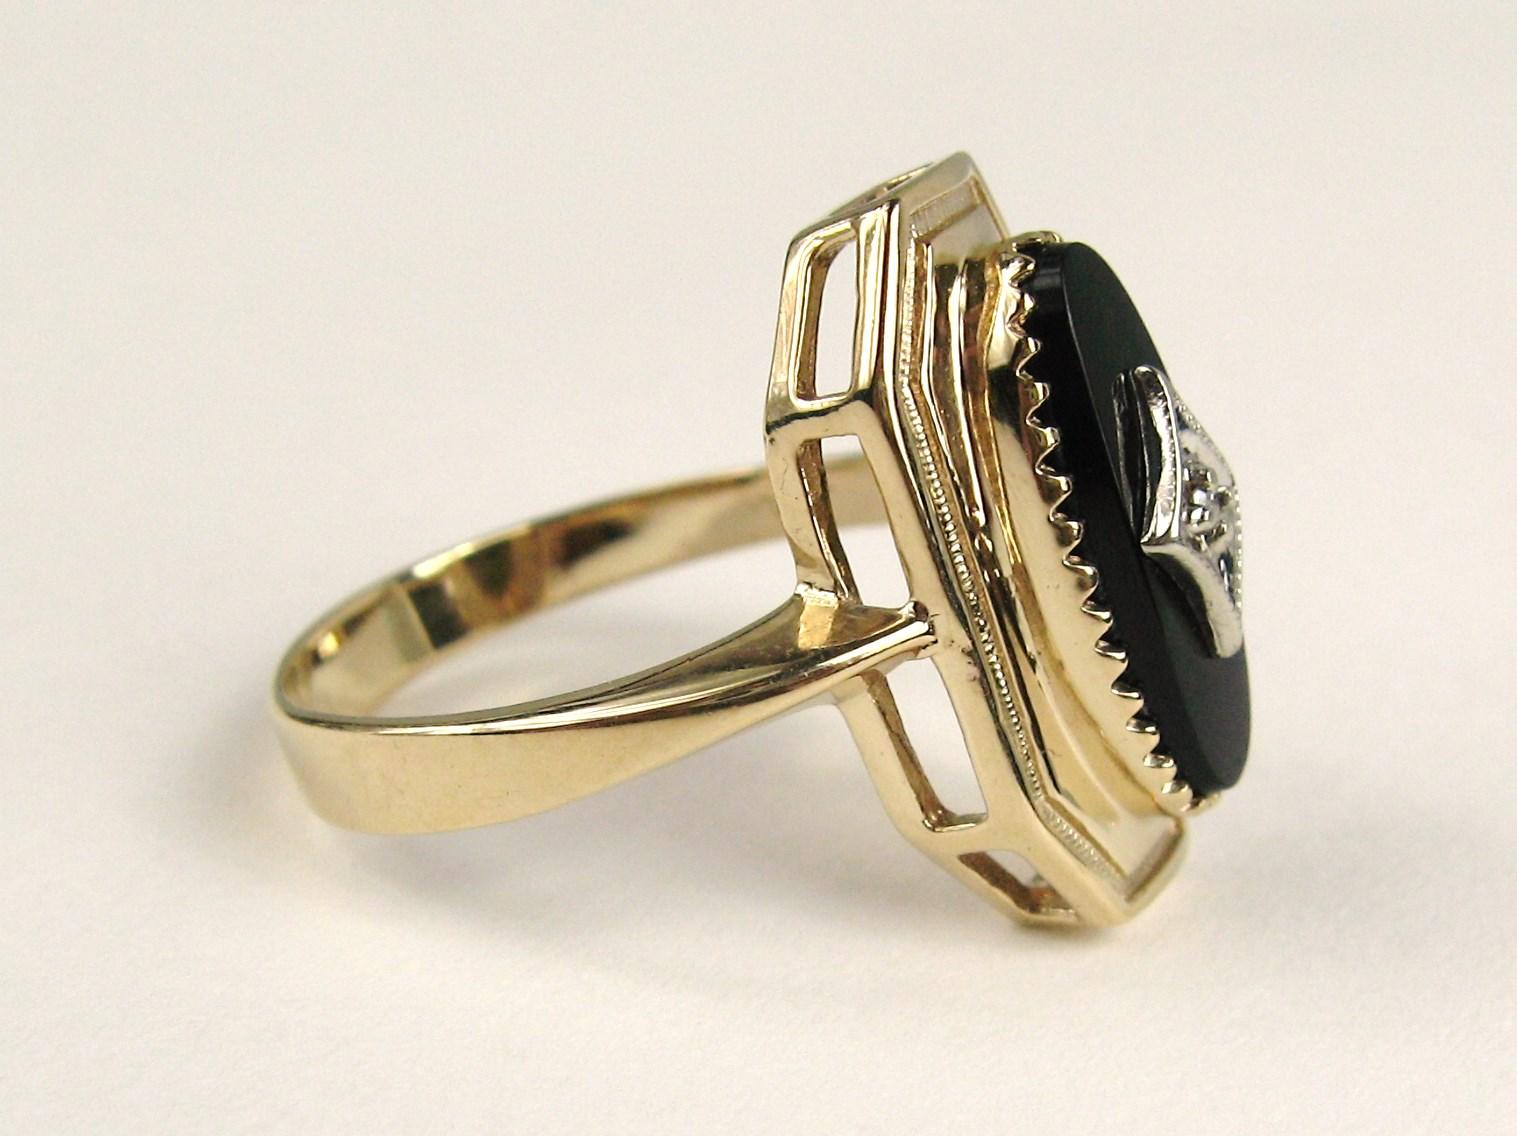 10 Karat Yellow Gold Black Onyx and Diamond Ring In Good Condition For Sale In Wallkill, NY